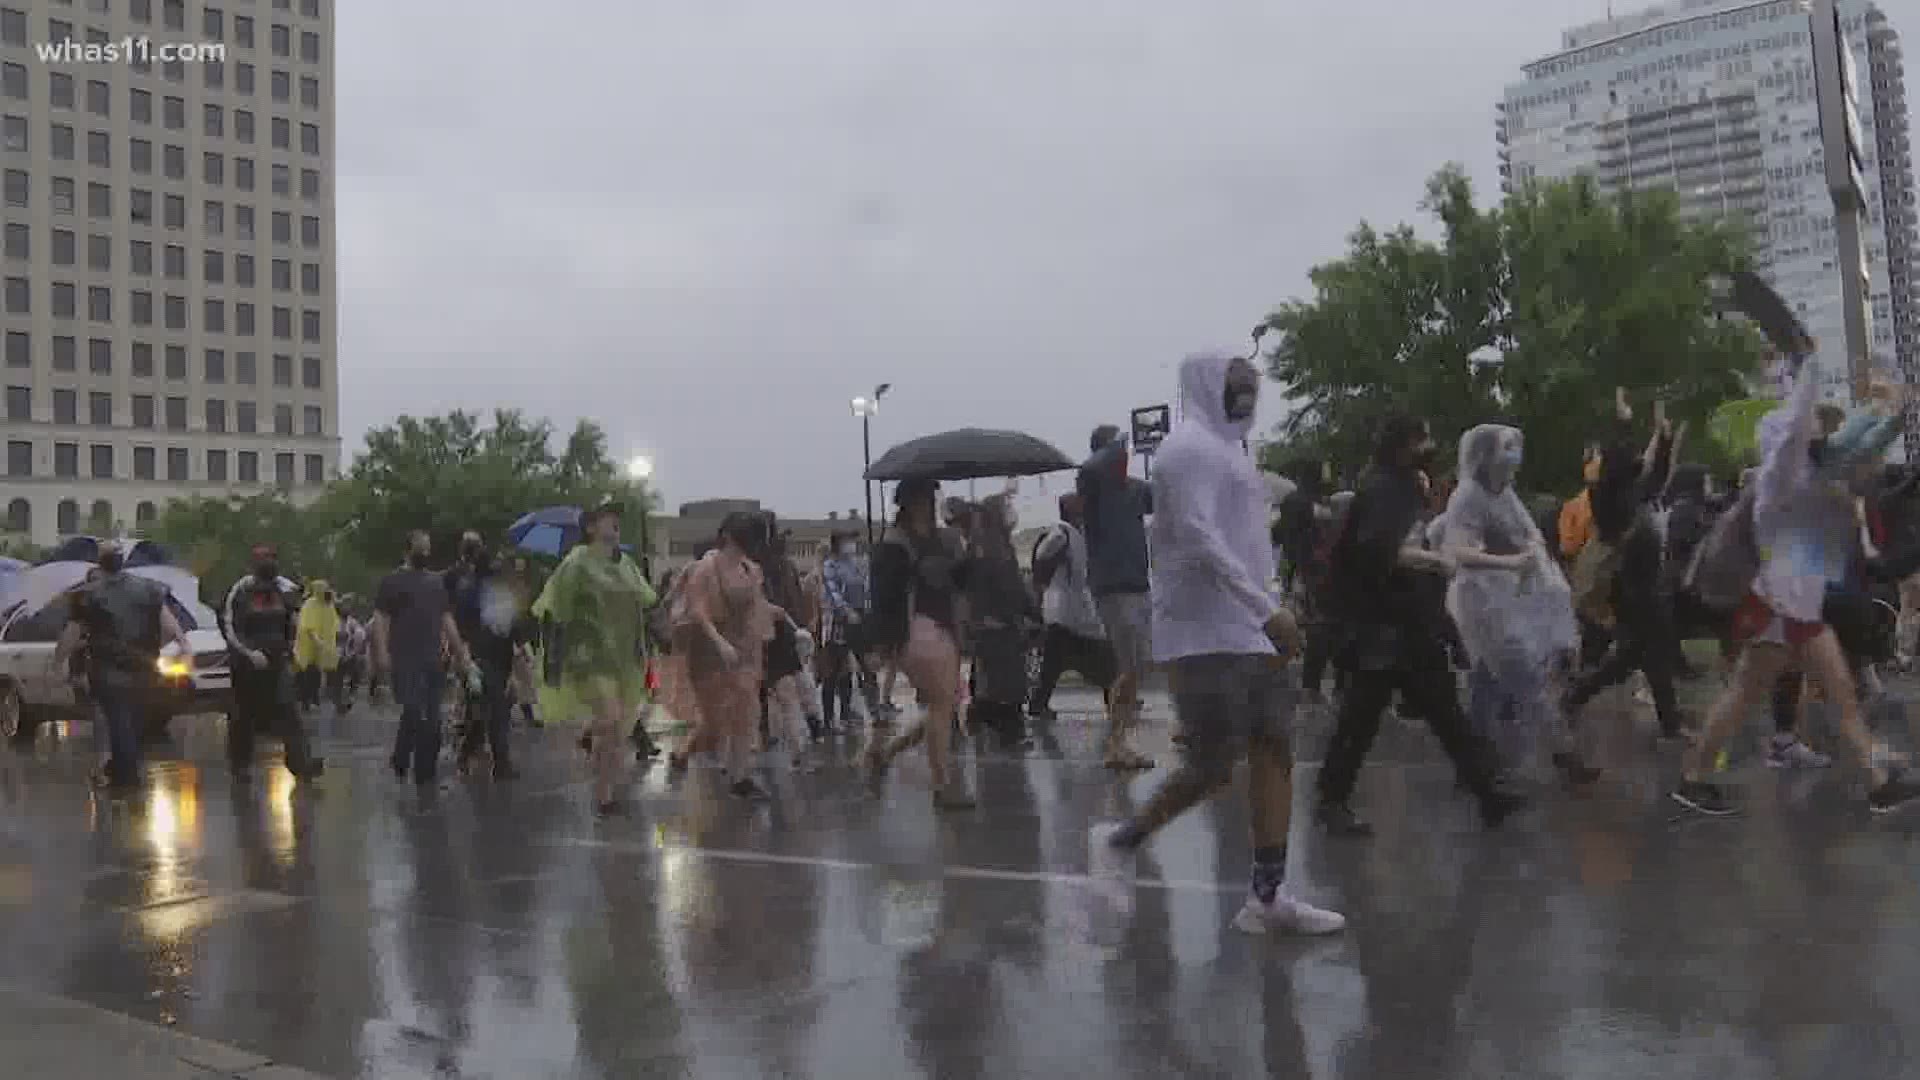 Despite the rain, peaceful protesters continued their demonstrations for justice.